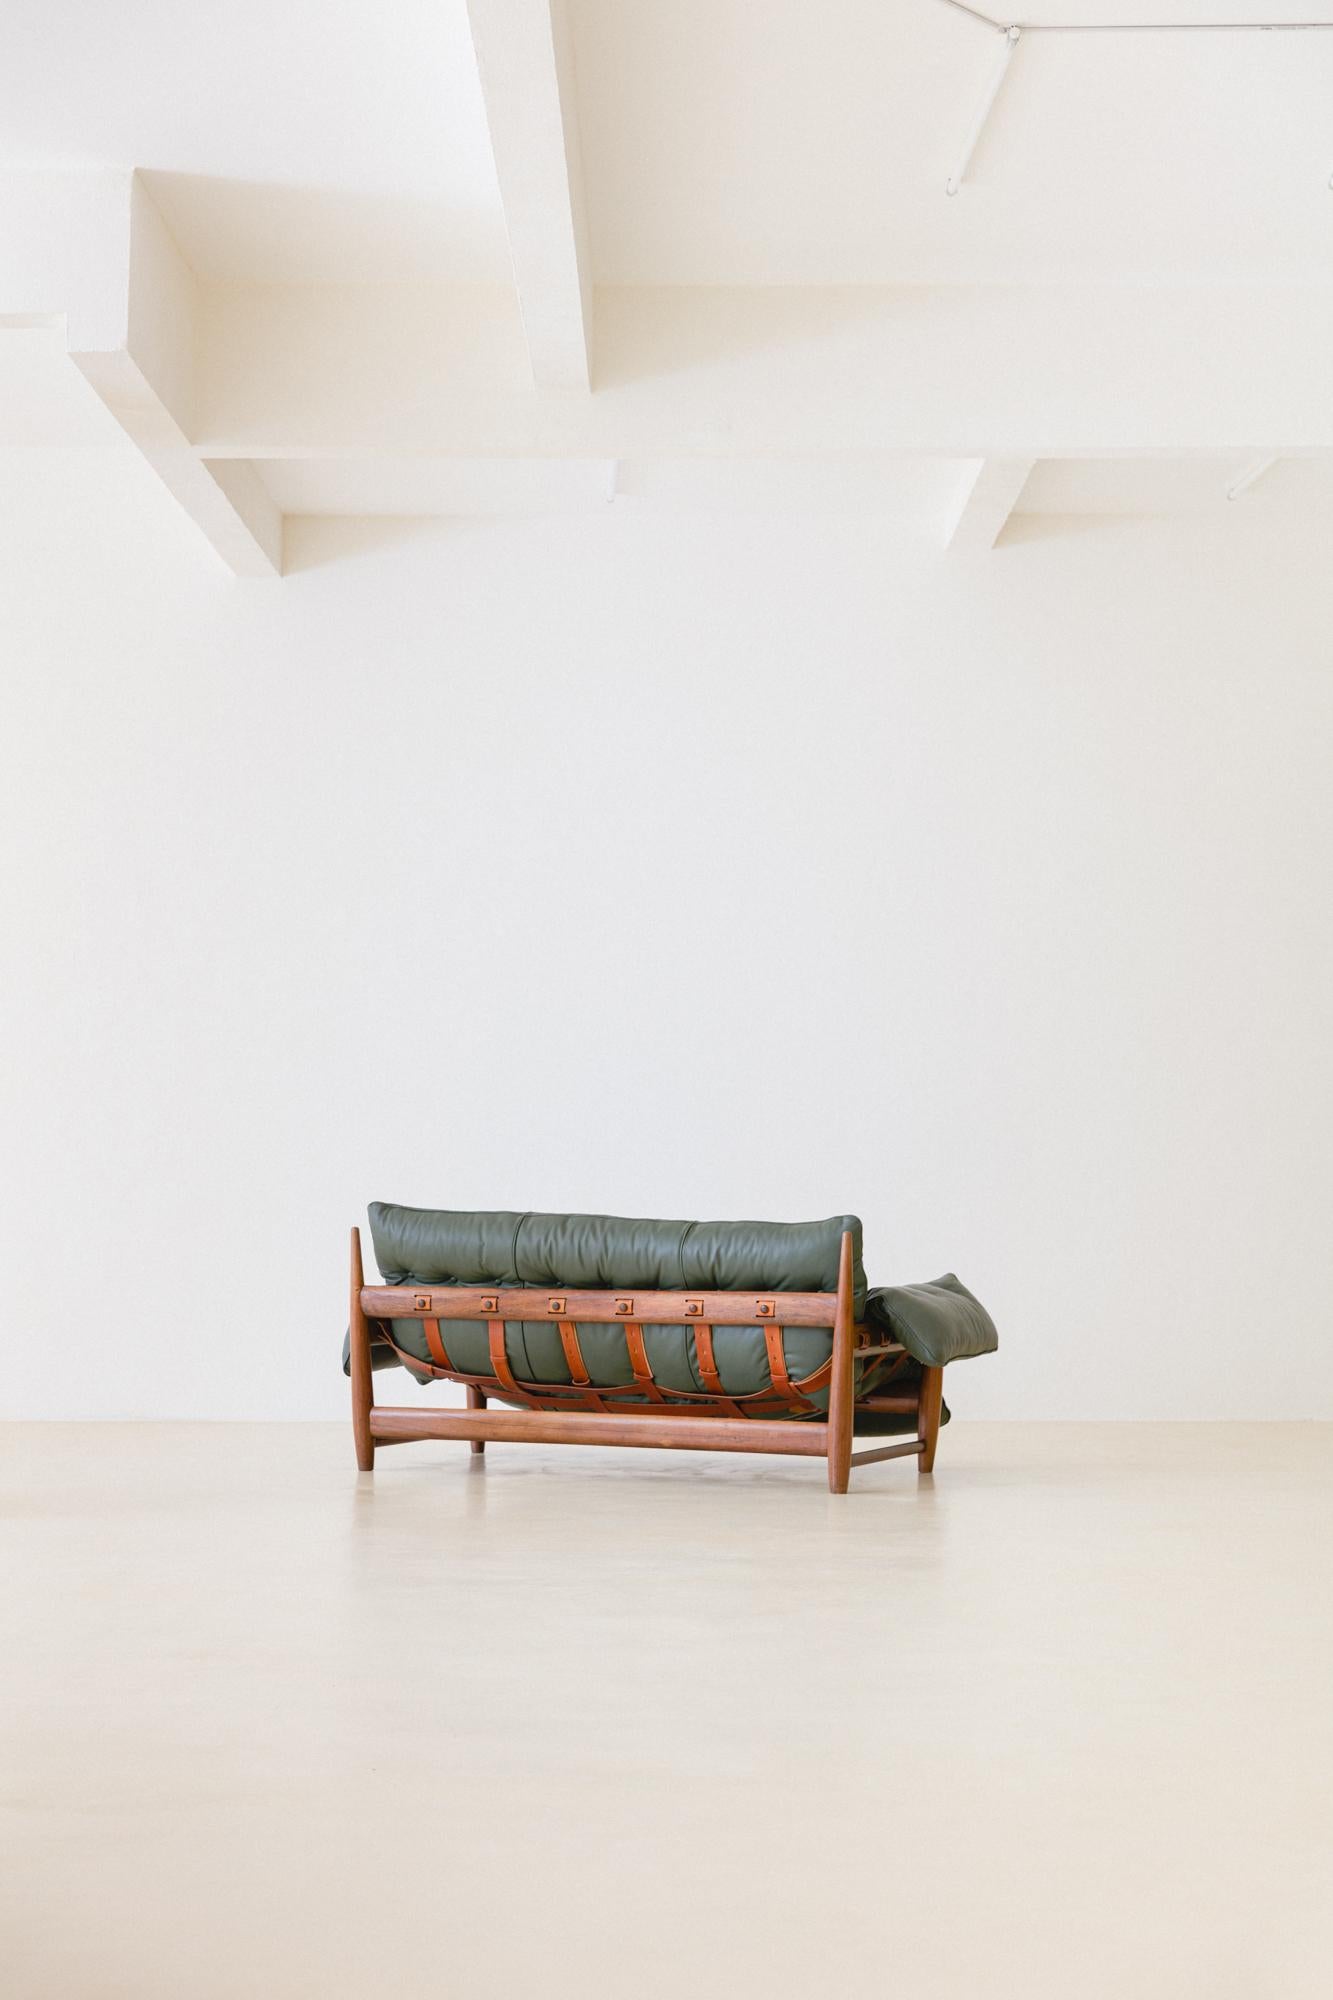 Leather Vintage 'Mole' Solid Rosewood Sofa by Sergio Rodrigues, 1960s, Brazil For Sale